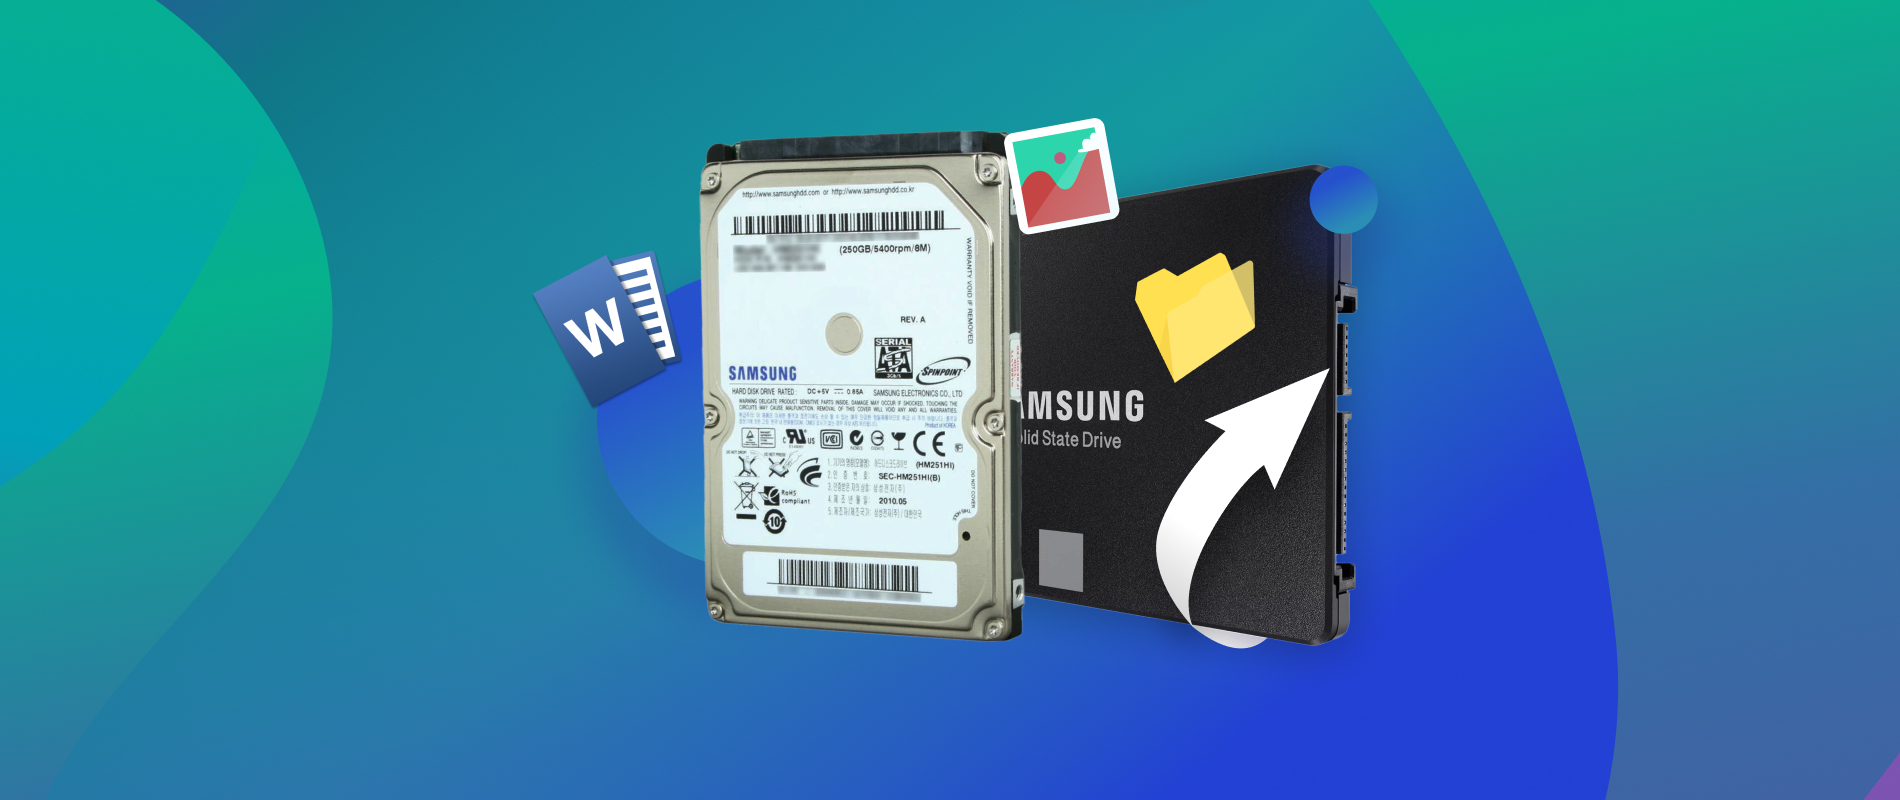 Samsung Hard Drive Recovery: Recover Data From a Hard Drive